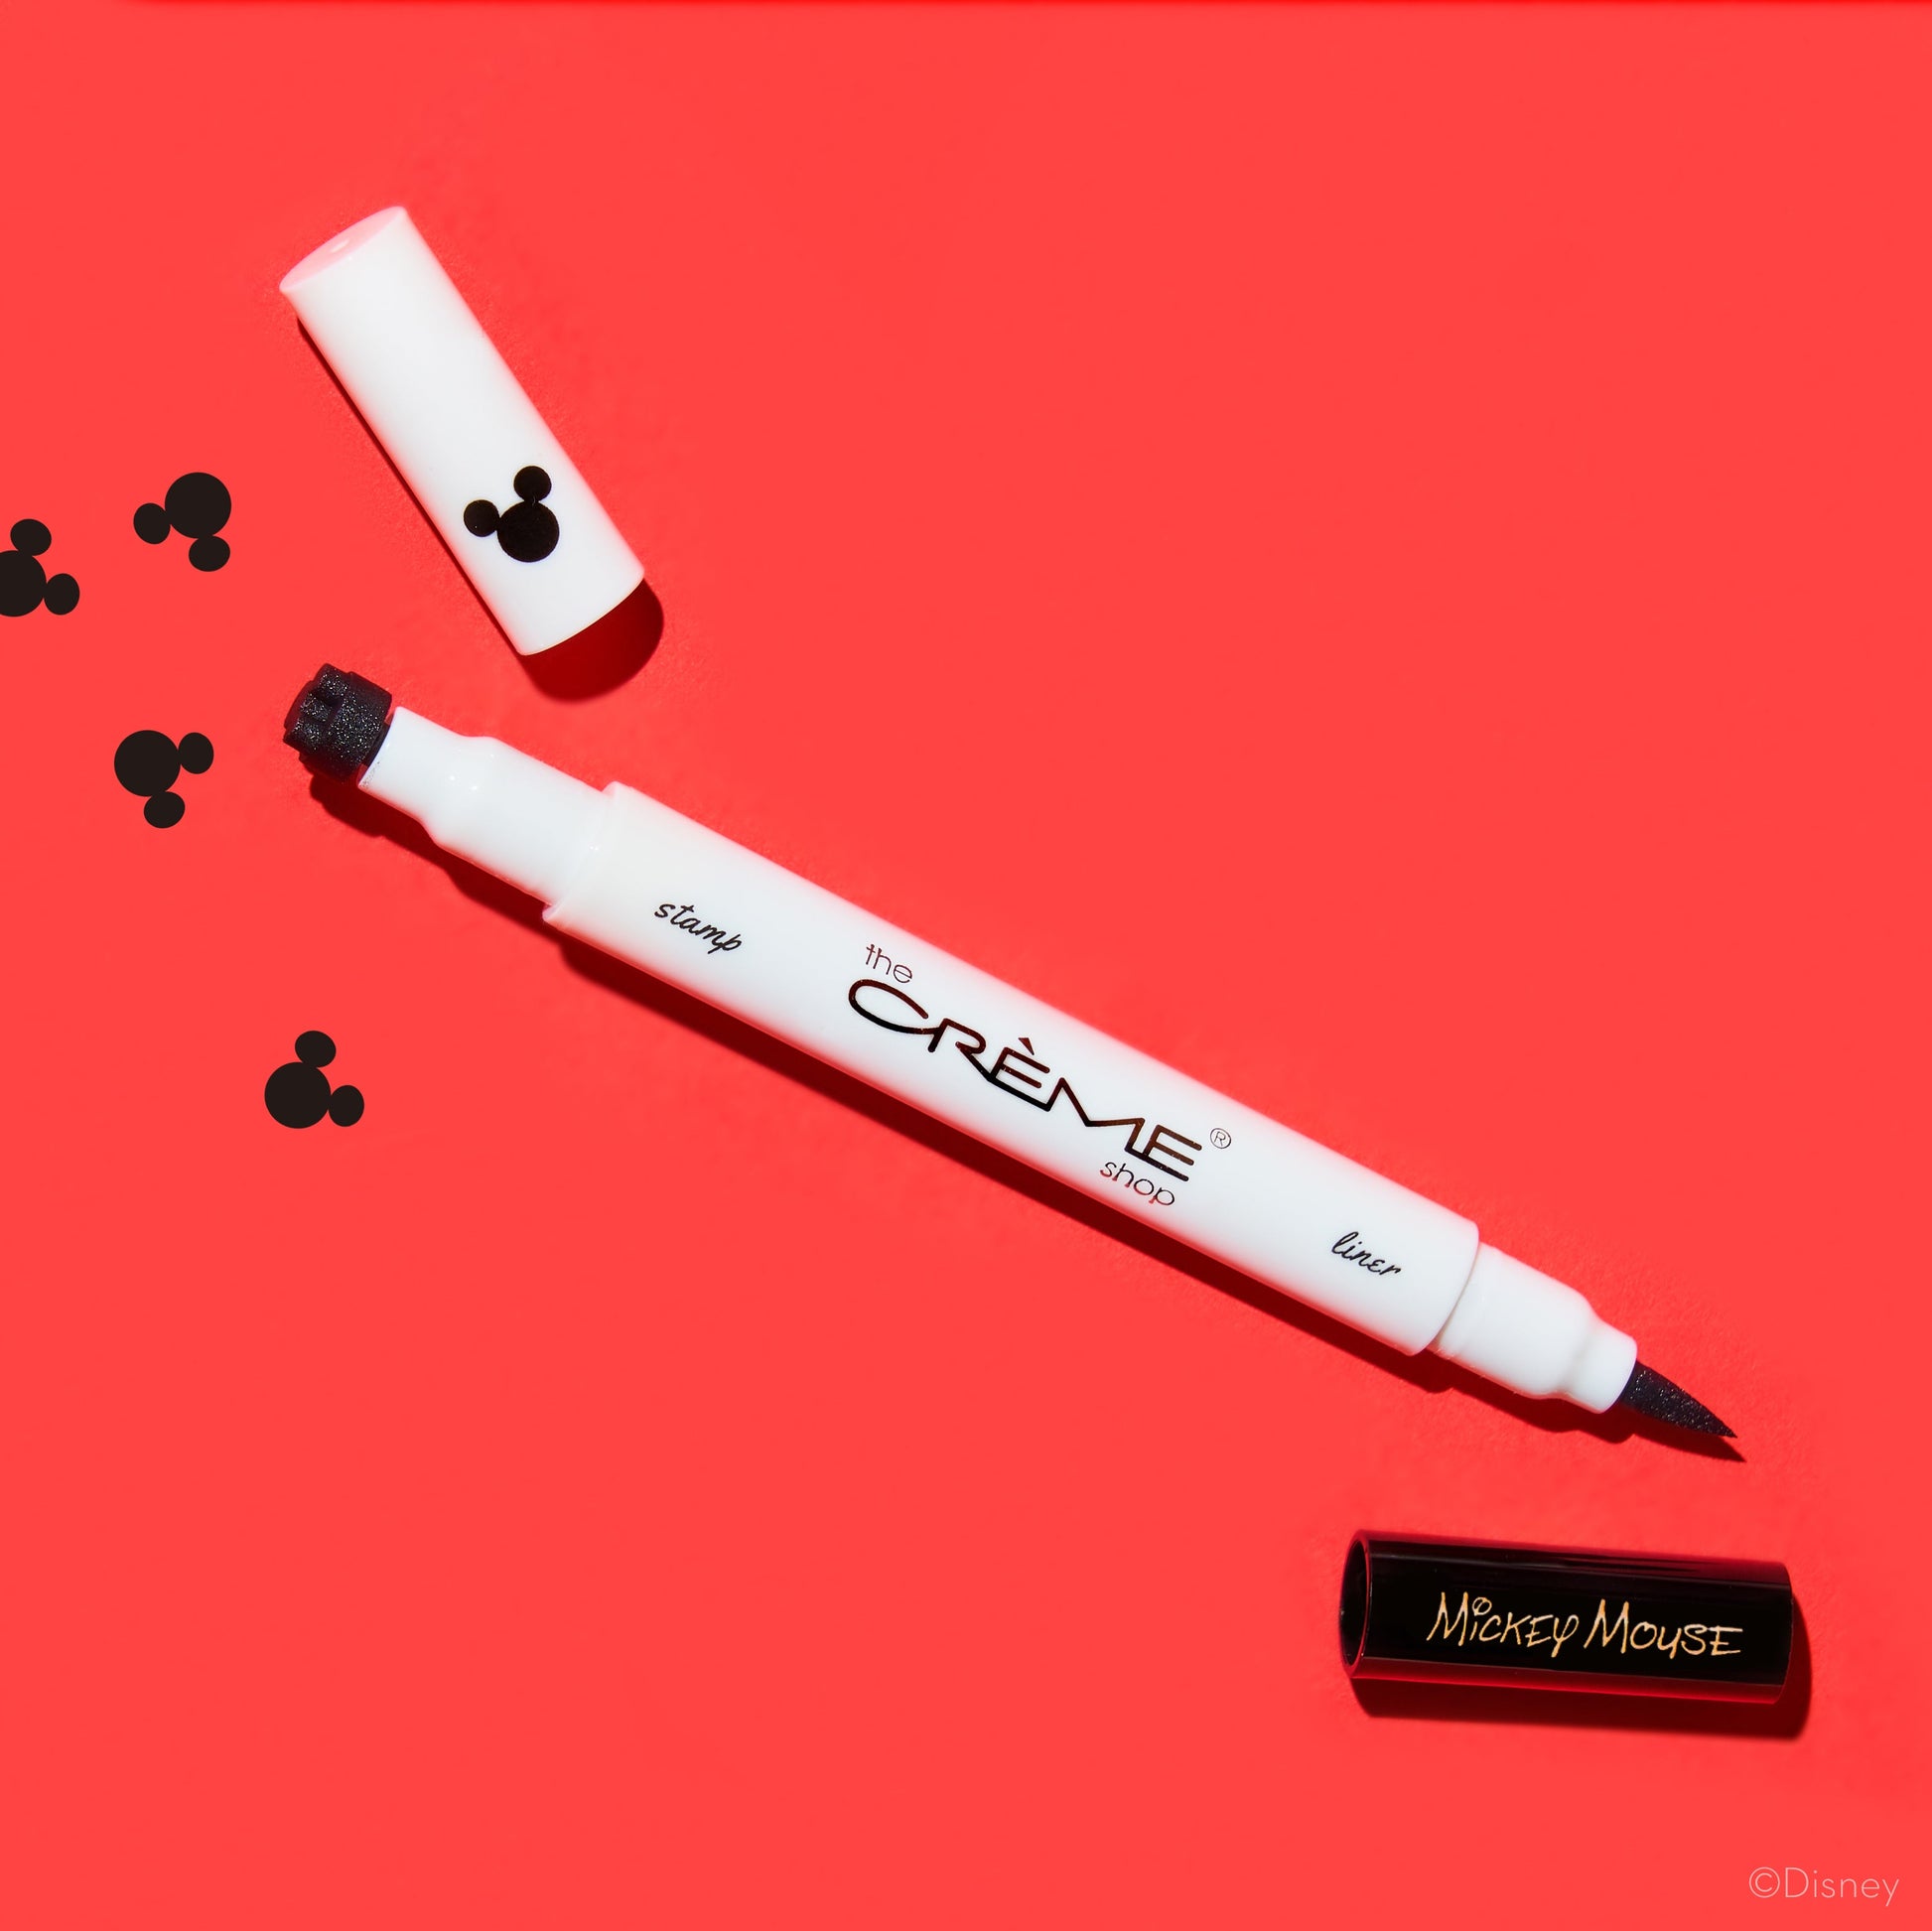 Face Stamp and Eye Liner Makeup Pen – Coco Coquette